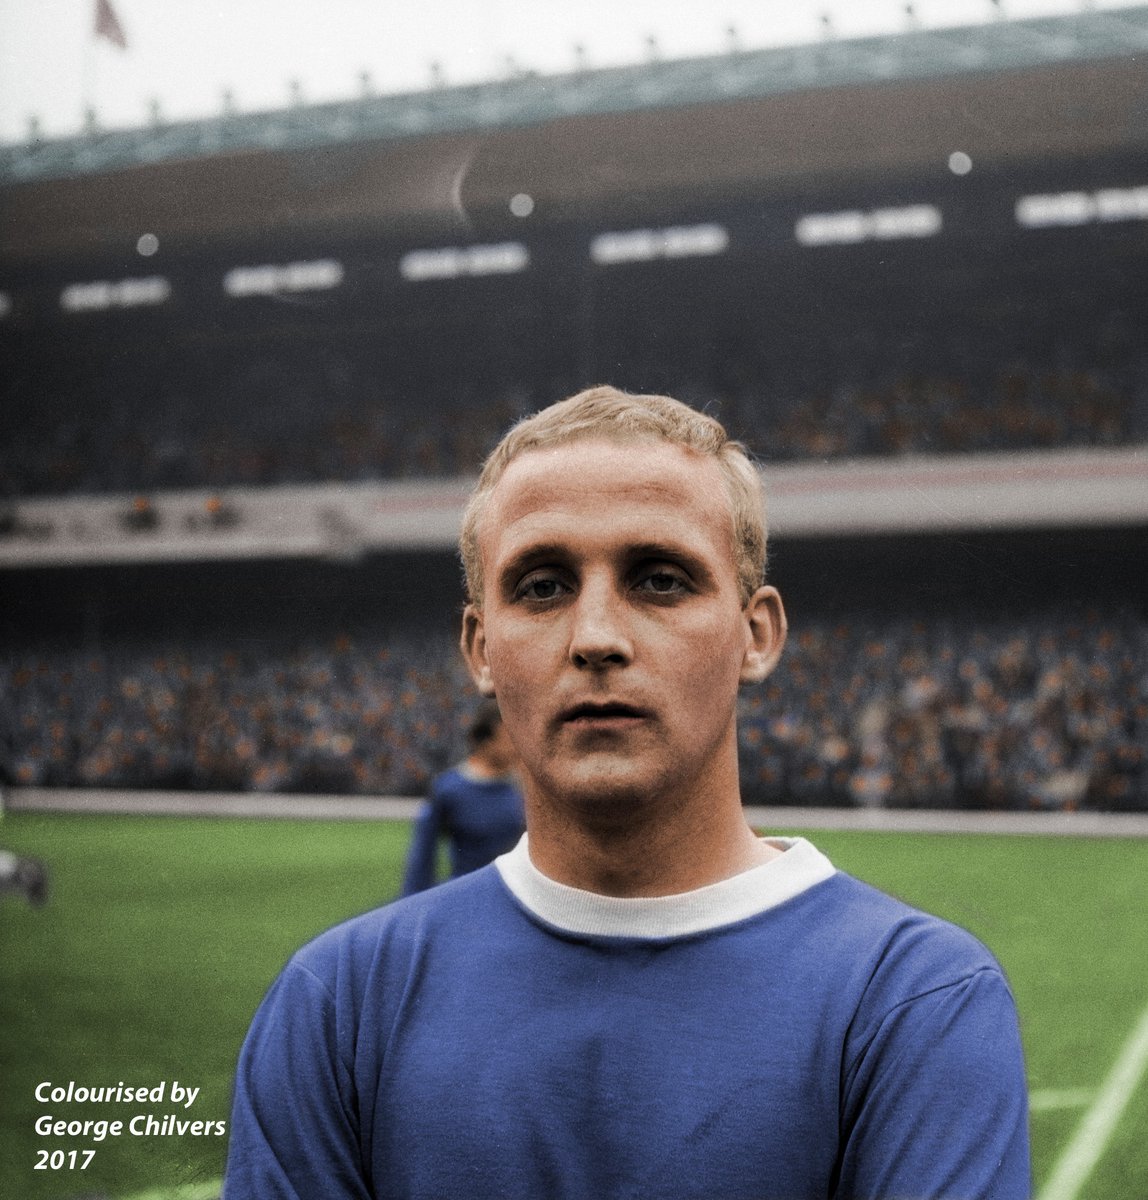 Alex Young #EvertonFC colourised by @Garswoodlatic